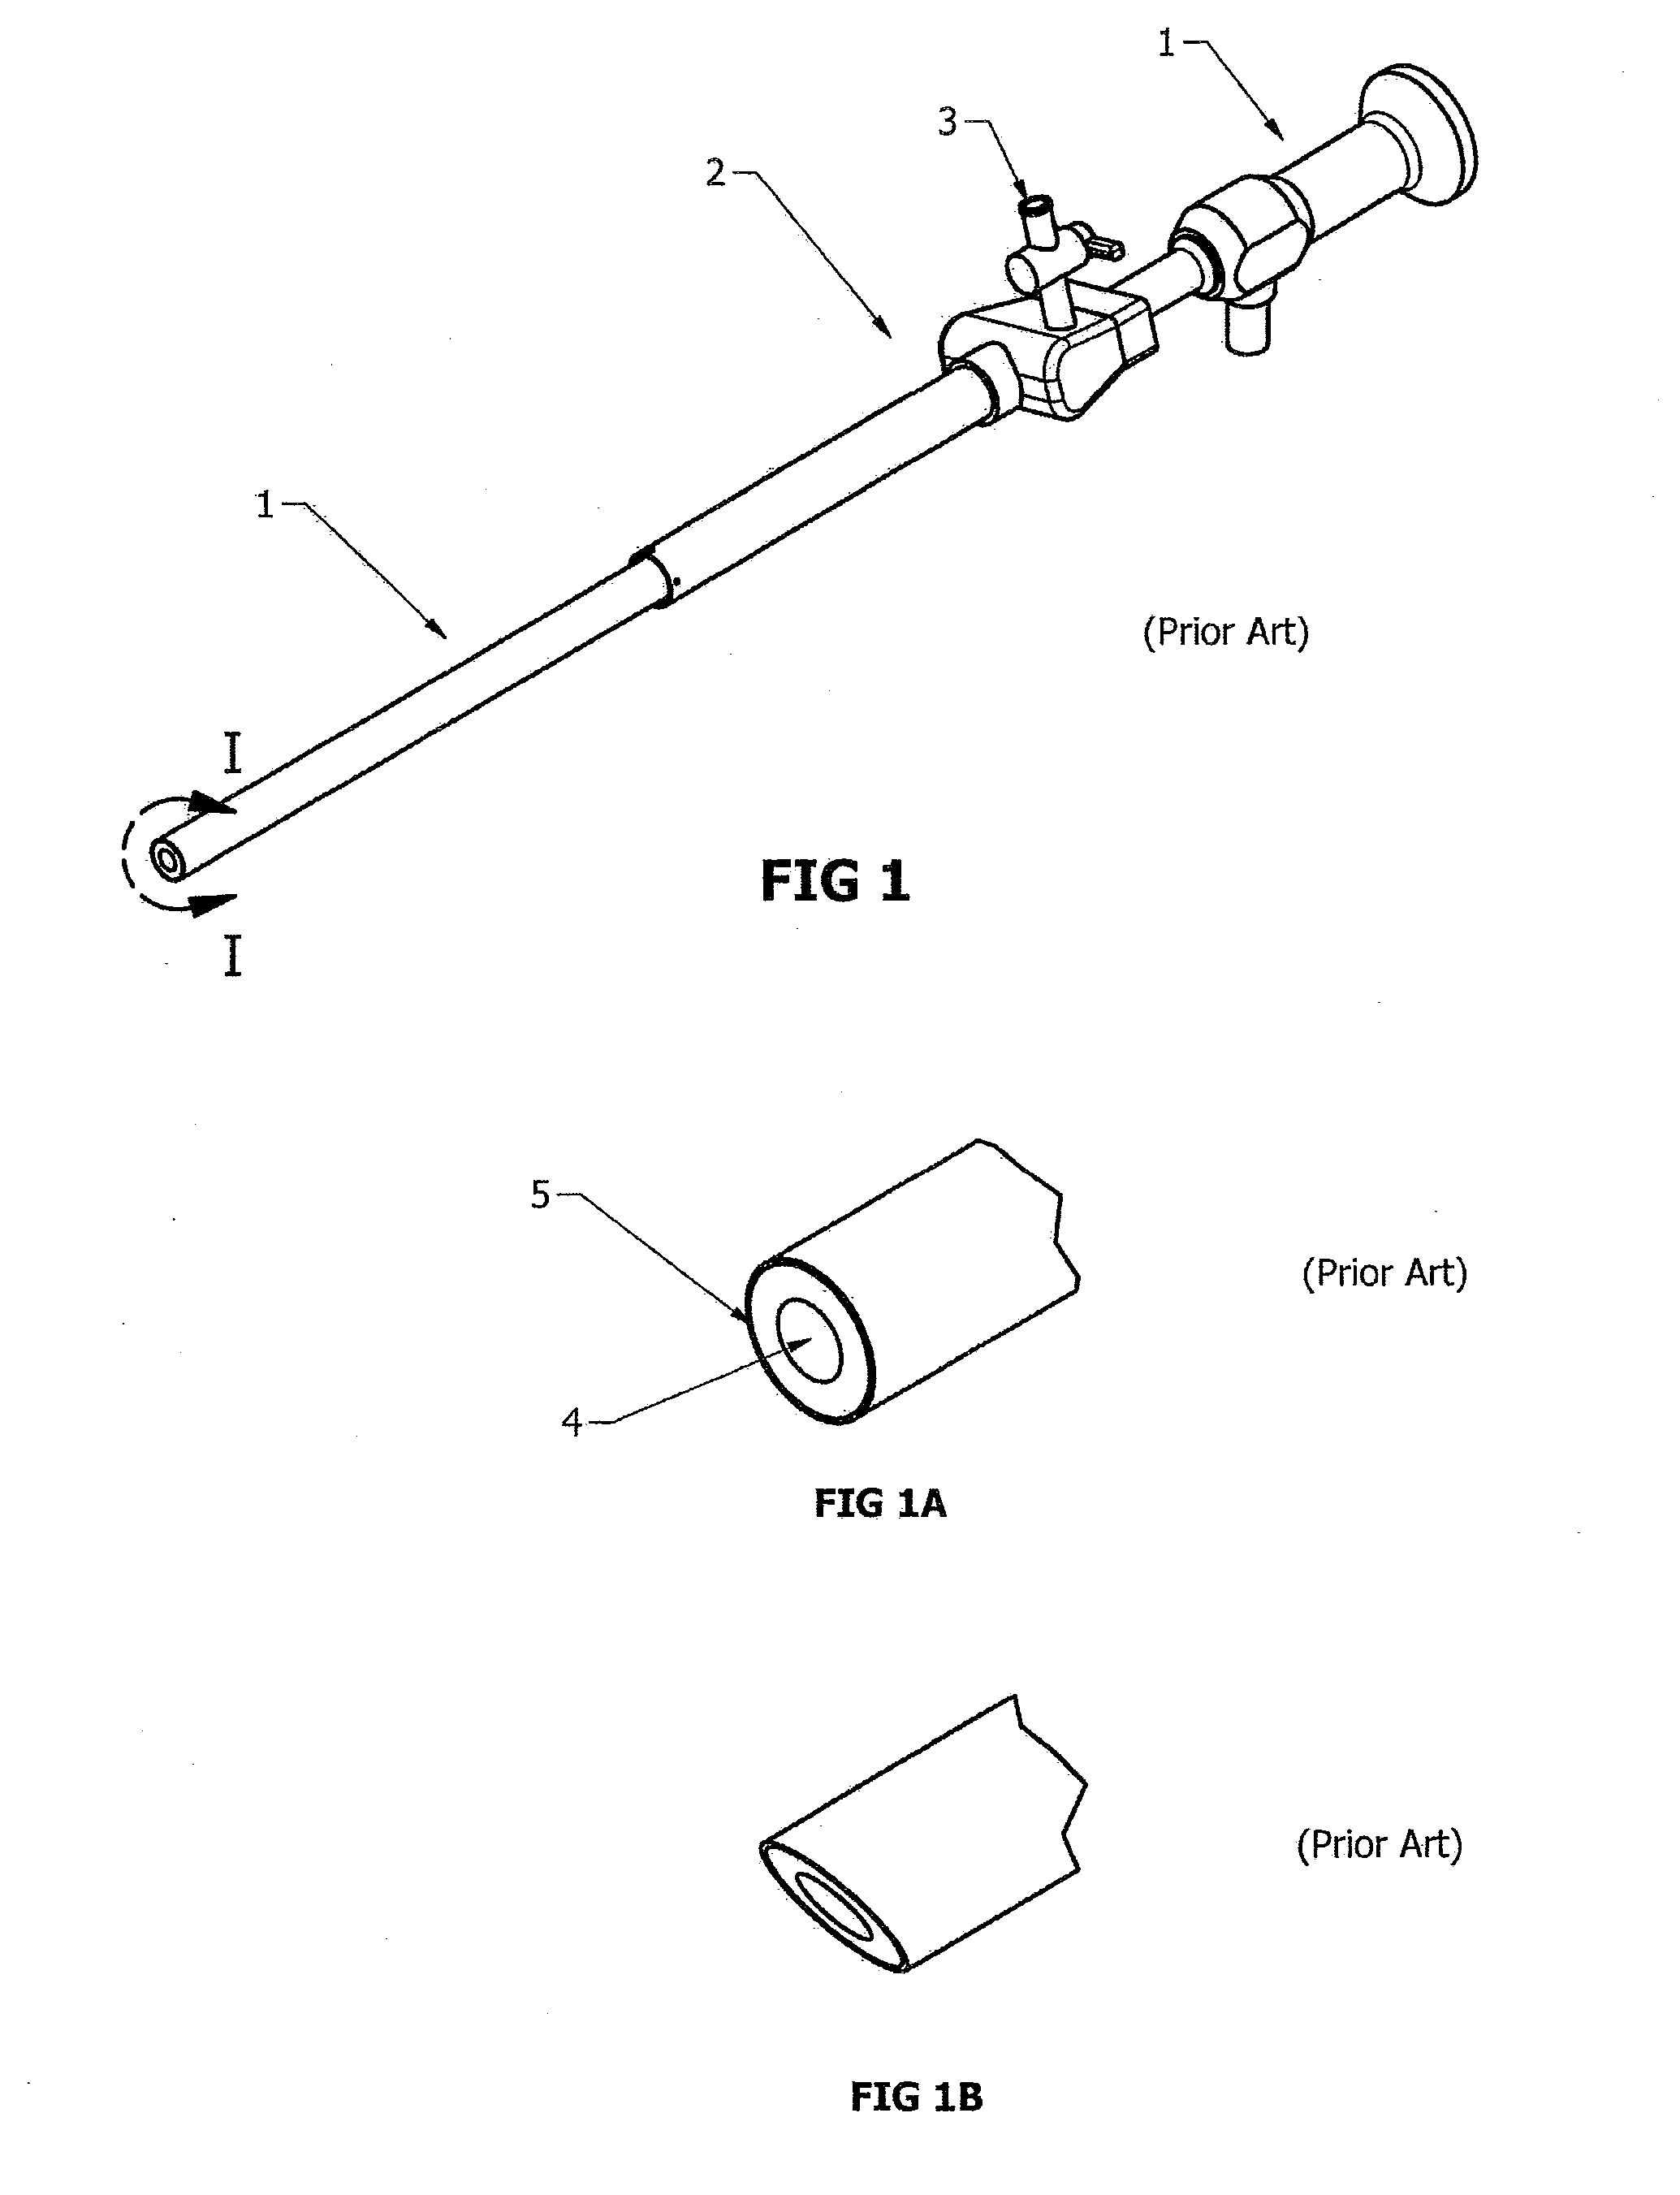 Method and Apparatus for Cleaning the Field of View of an Endoscopic Lens